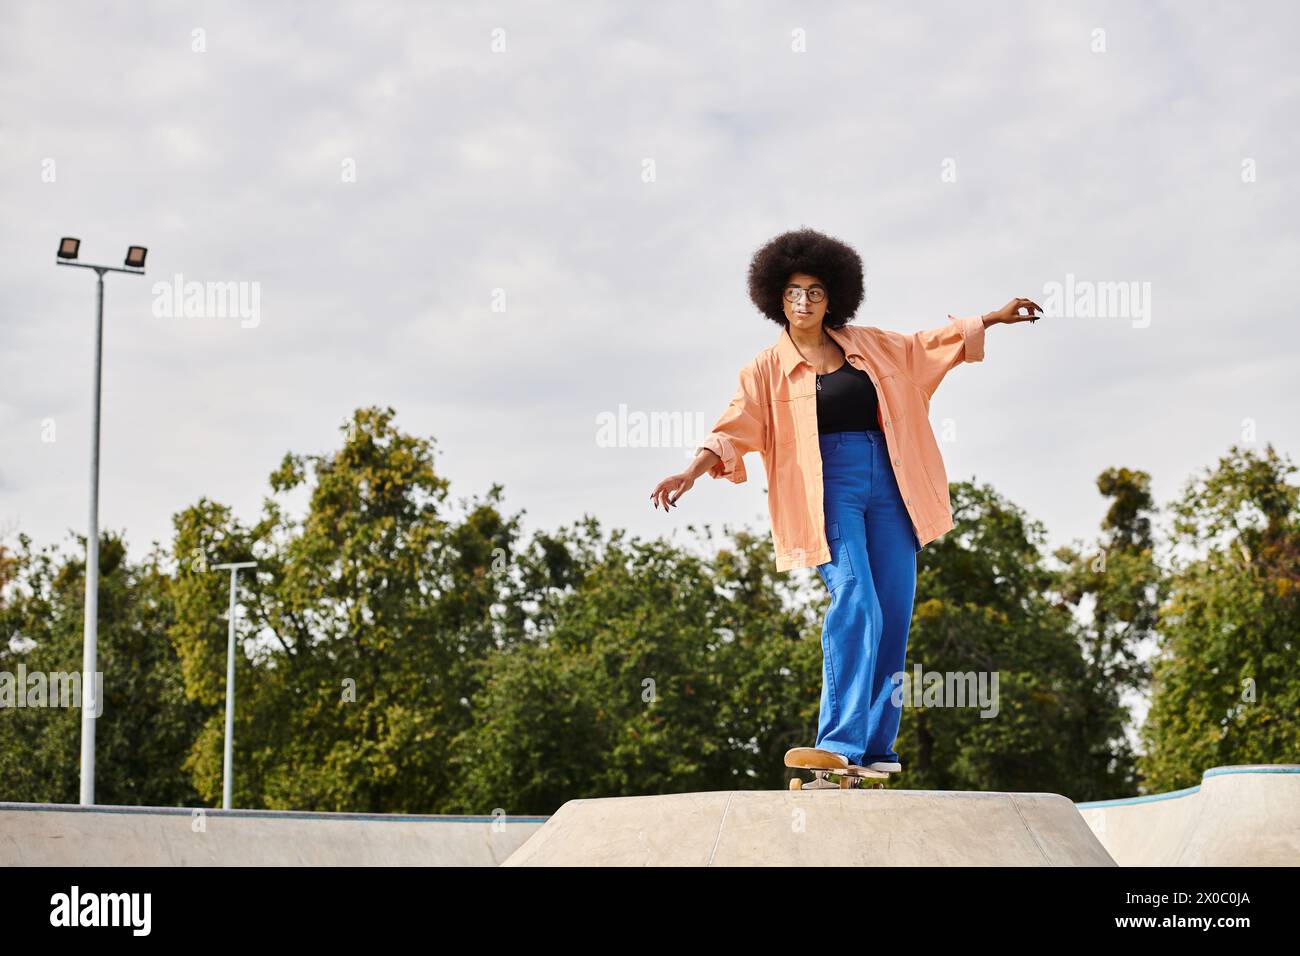 Young African American woman with curly hair skateboarding on top of a cement ramp in a skate park. Stock Photo